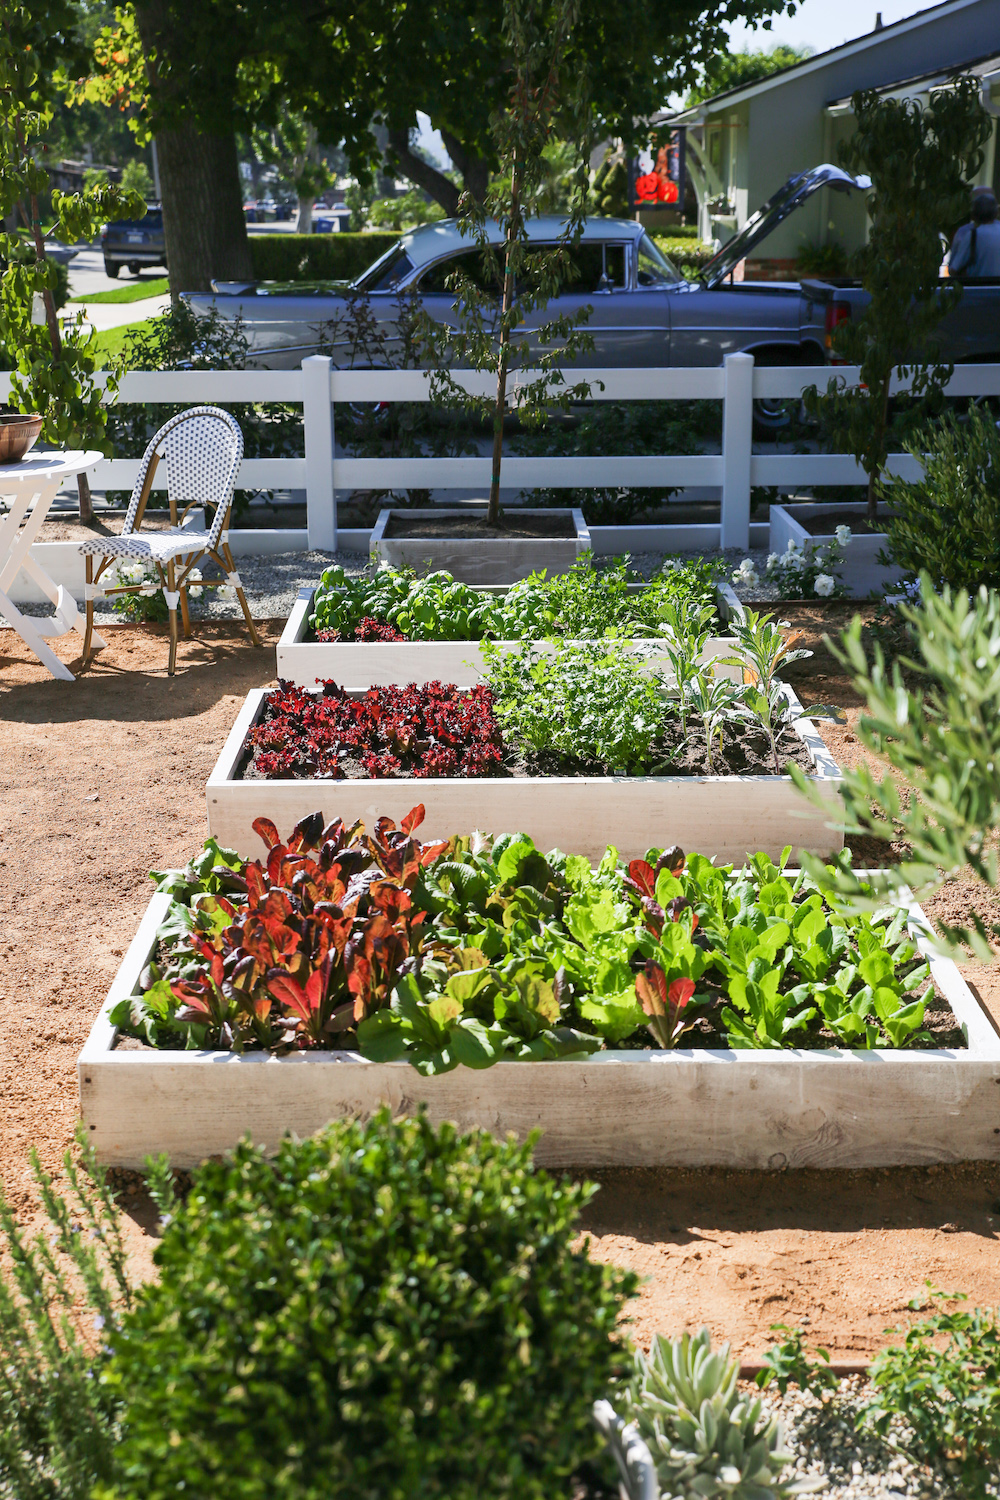 Plant boxes help create an instant garden